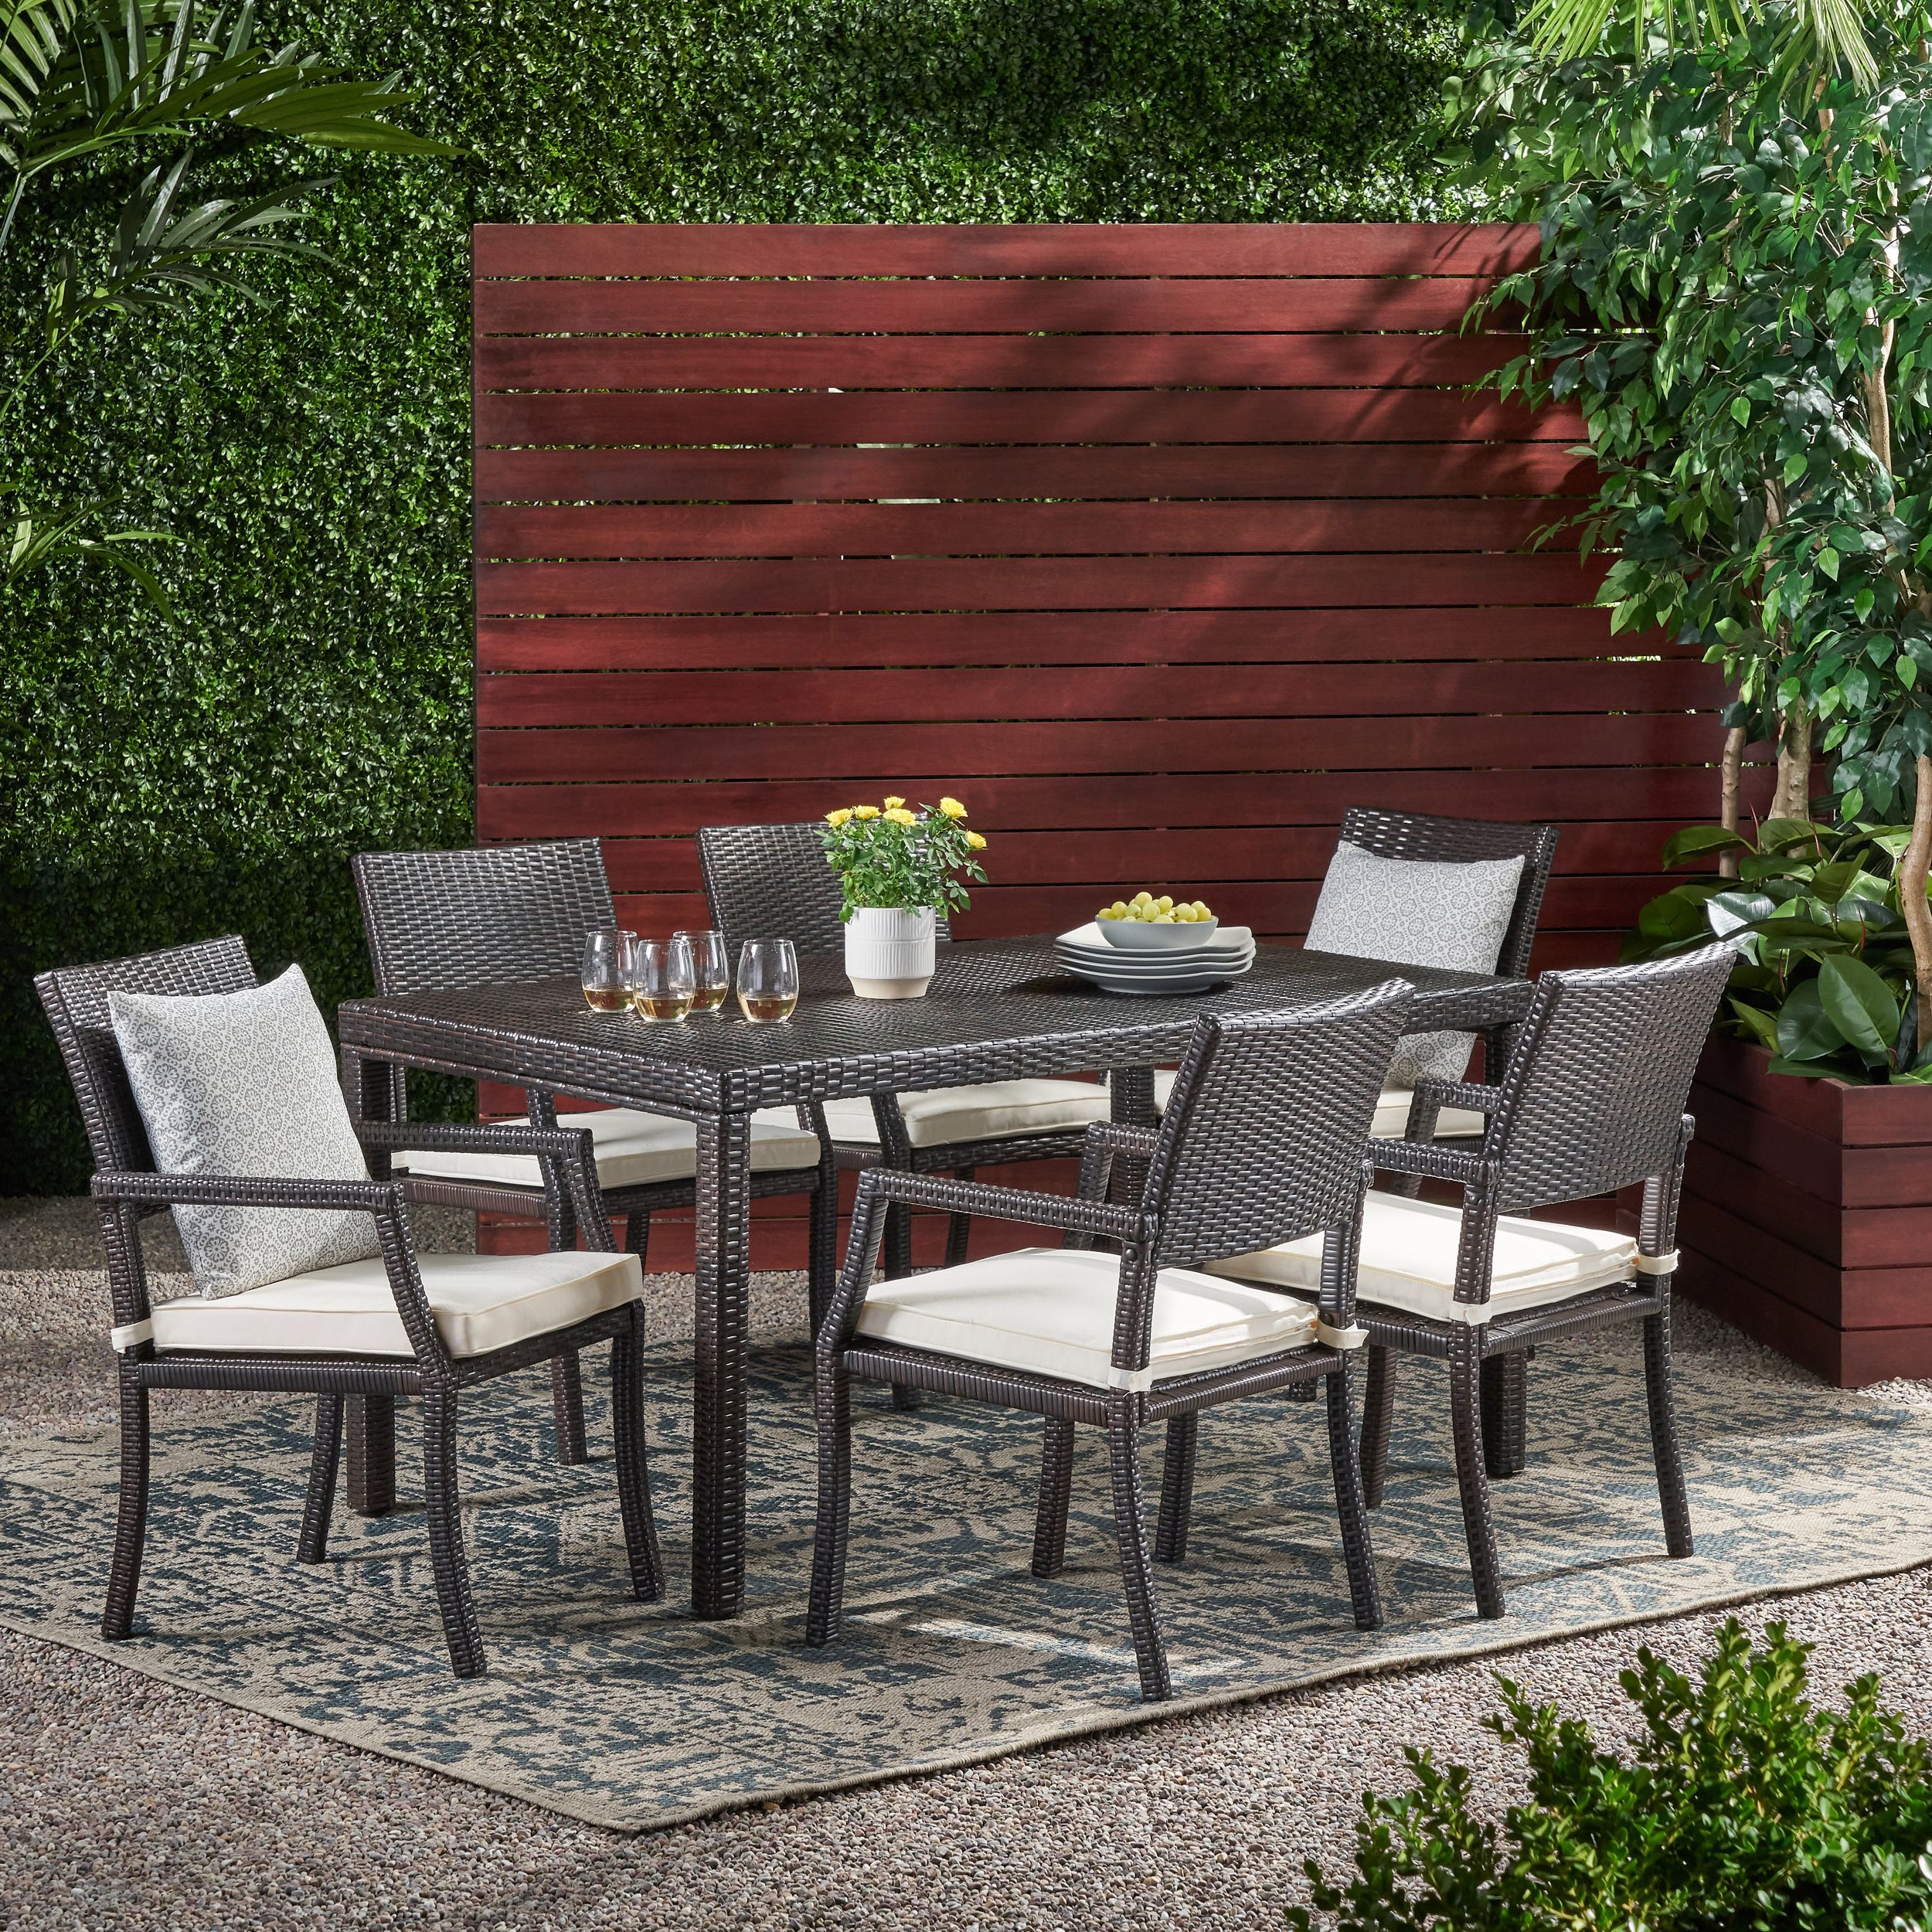 Large Rectangular Patio Dining Sets Within Fashionable Outdoor 7 Piece Wicker Rectangular Dining Set,multibrown,white (View 2 of 15)